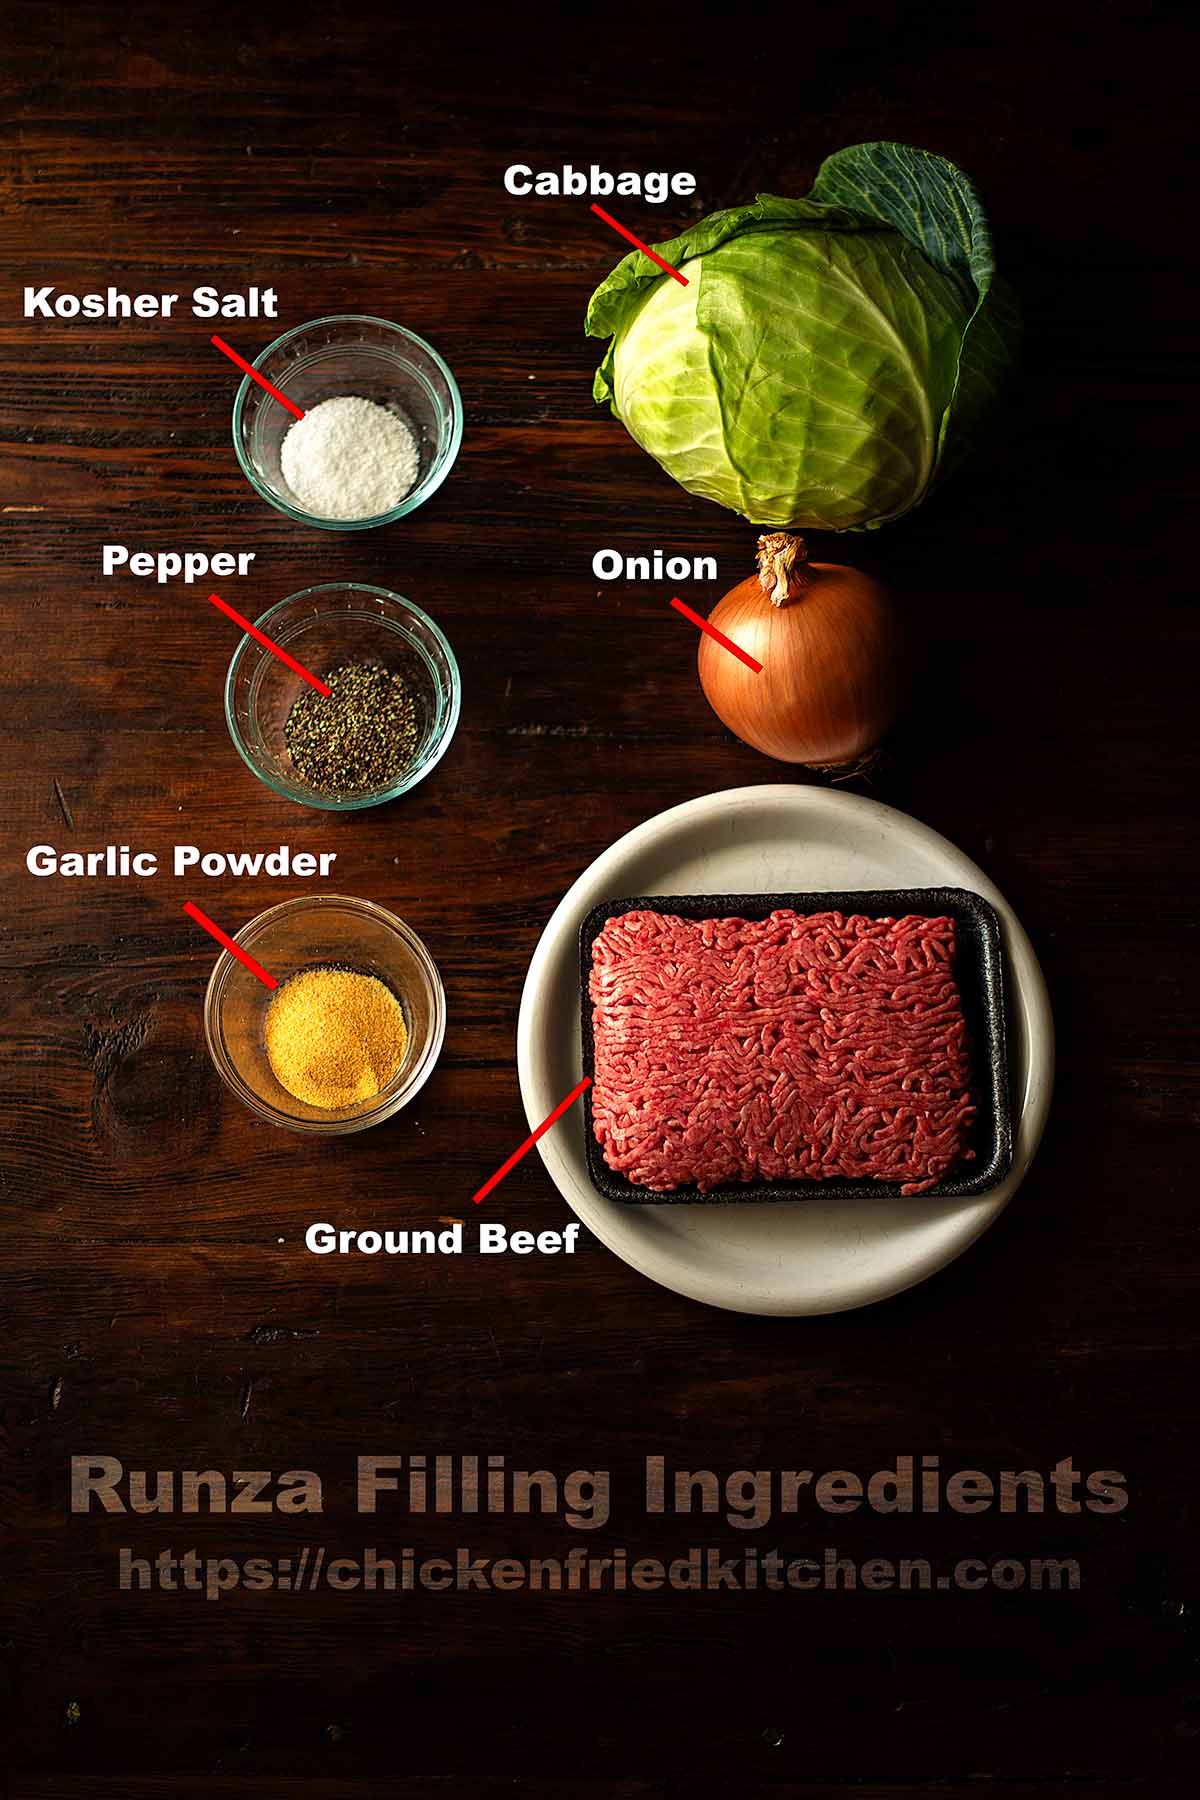 Runza filling ingredients labeled and laid out on a rustic wooden table.